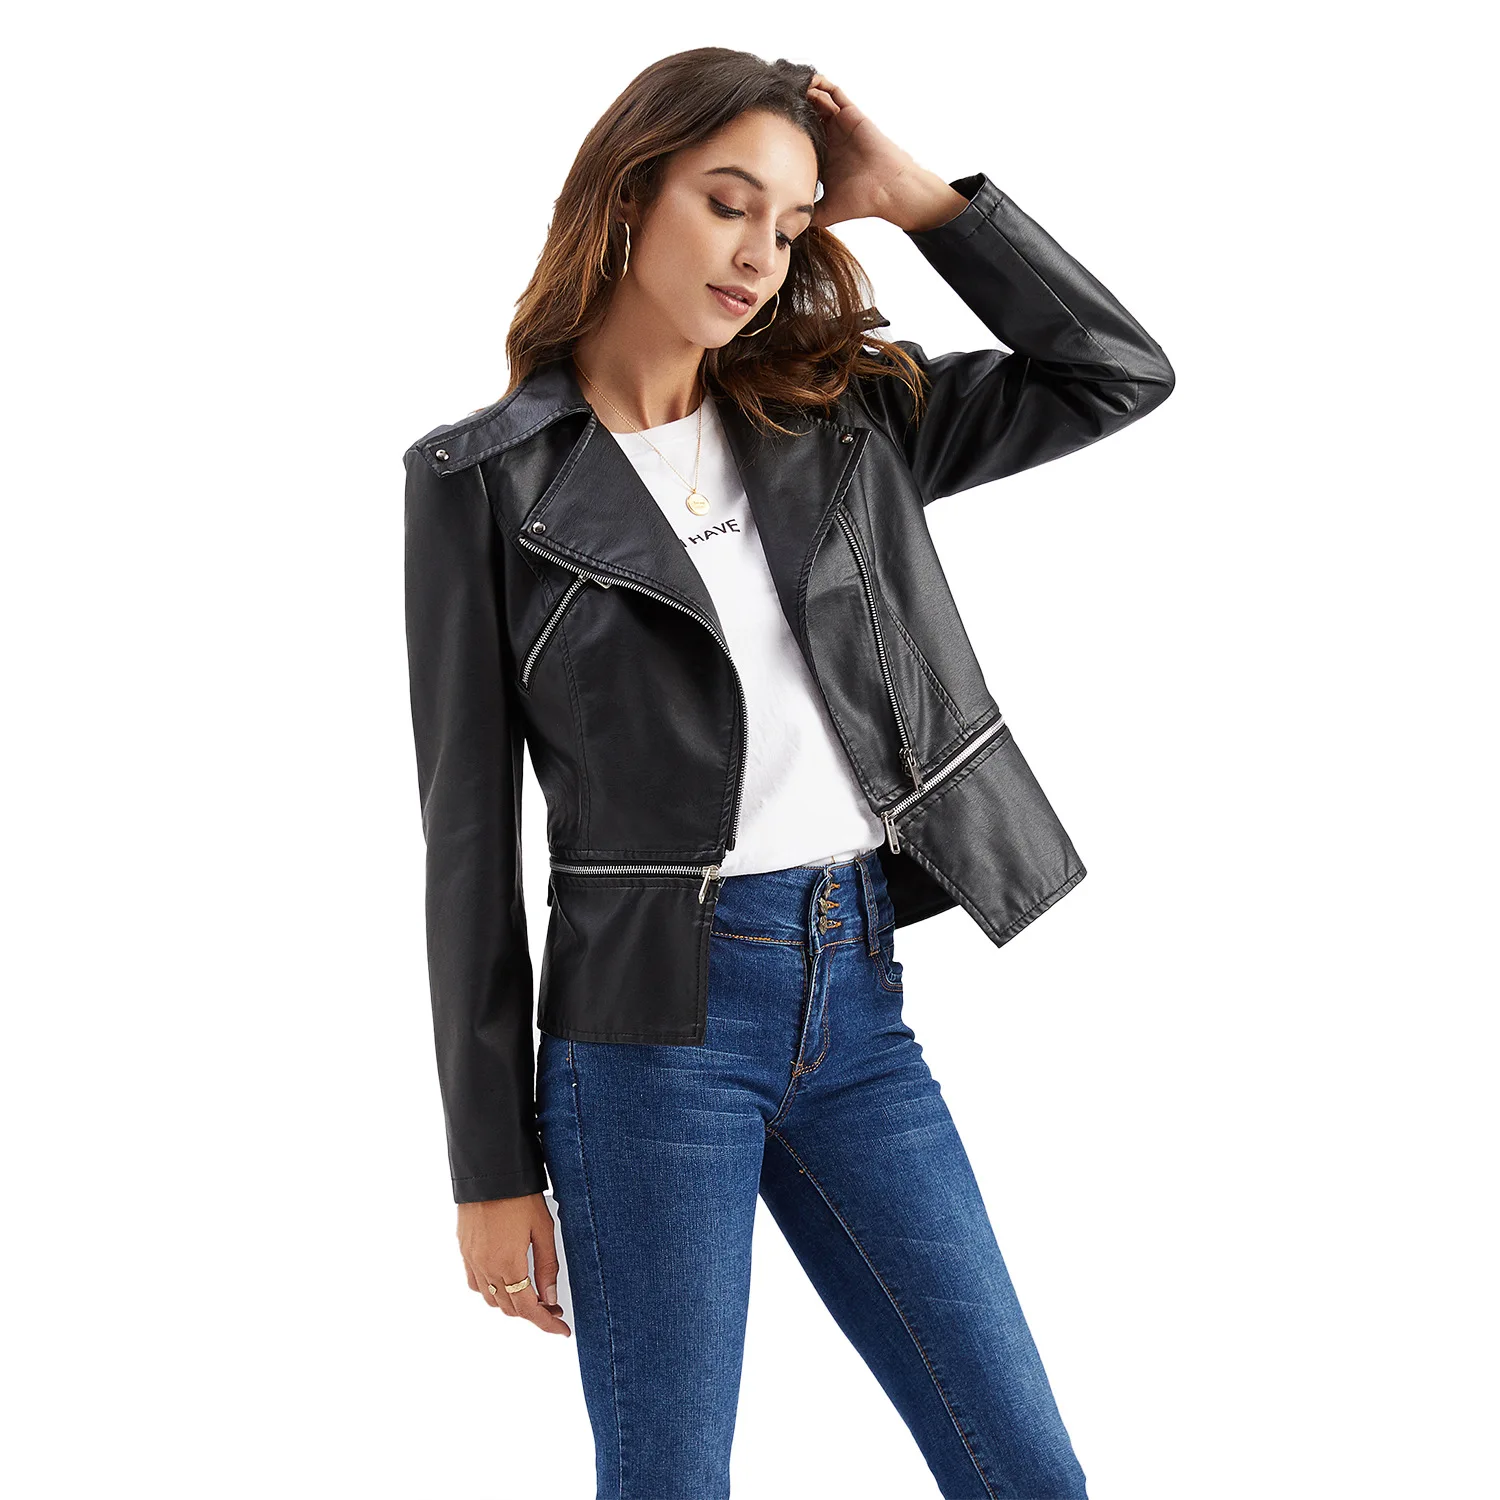 Women's Leisure Hem Detachable Leather Jacket, Spring and Autumn Coat, European and American Fashion, High-Quality Lapel Zipper, 2021 new european and american autumn and winter women s clothing detachable hooded leather coat plush warm jacket